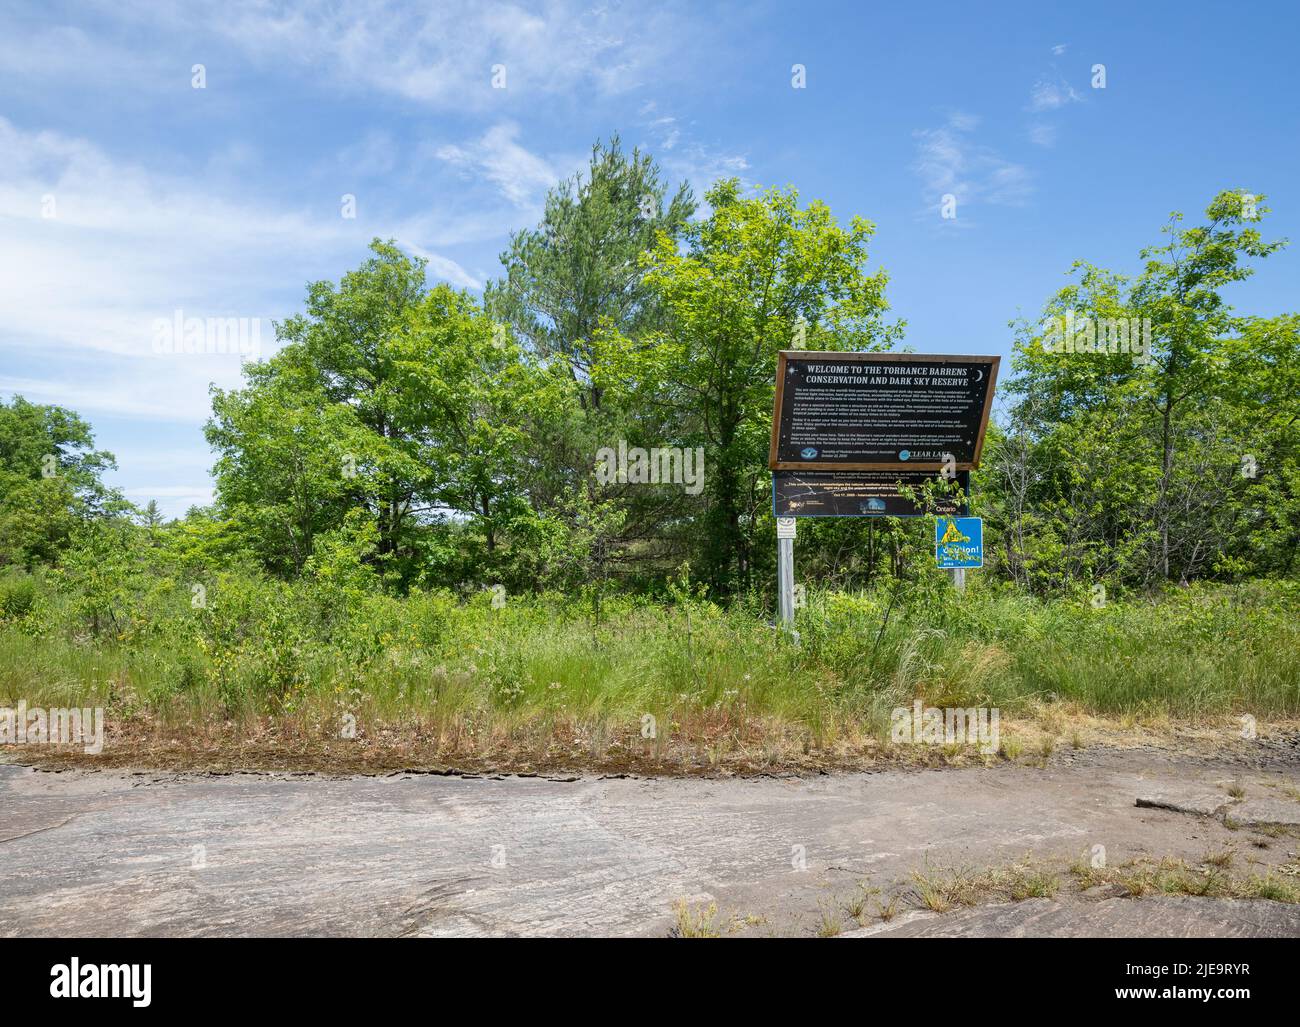 Canadian Shield and vegetation at Torrance Barrens nature preserve in Ontario Canada Stock Photo